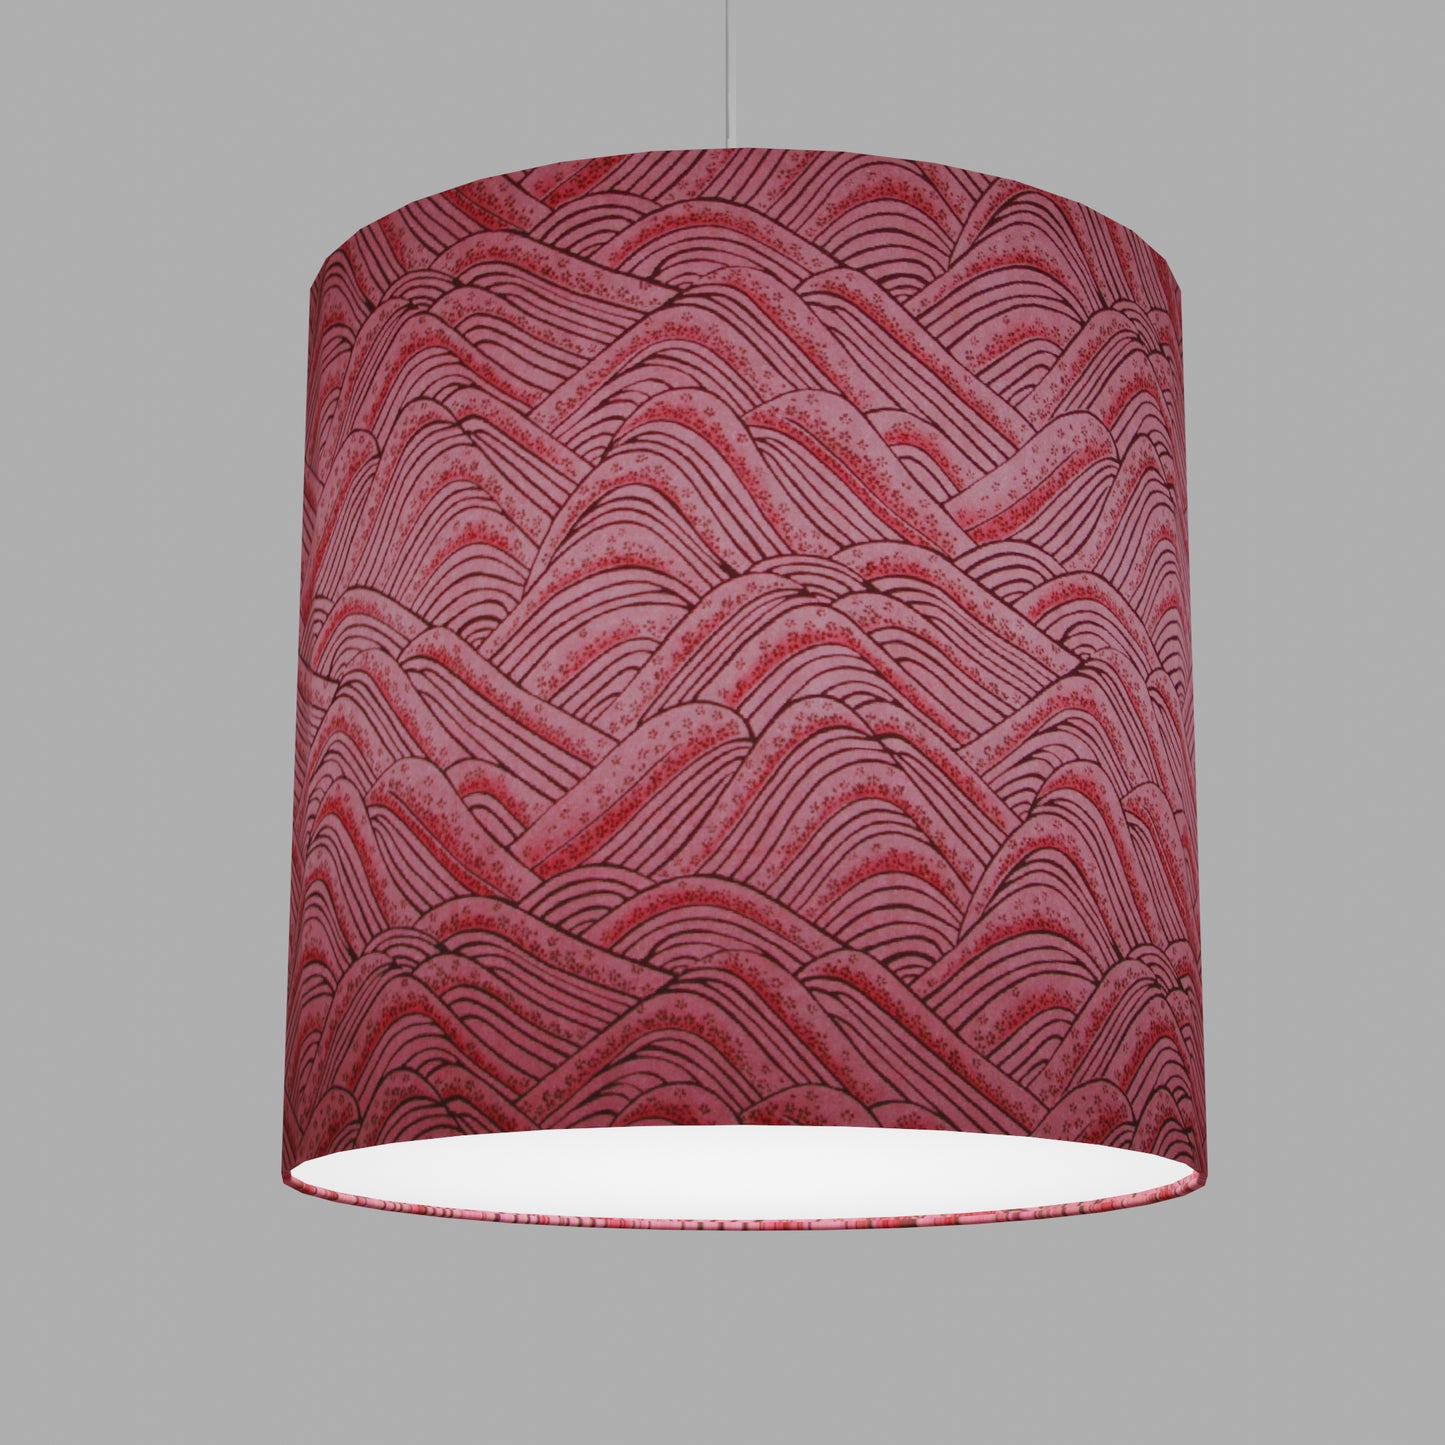 Drum Lamp Shade - W04 ~ Pink Hills with Gold Flowers, 40cm(d) x 40cm(h)